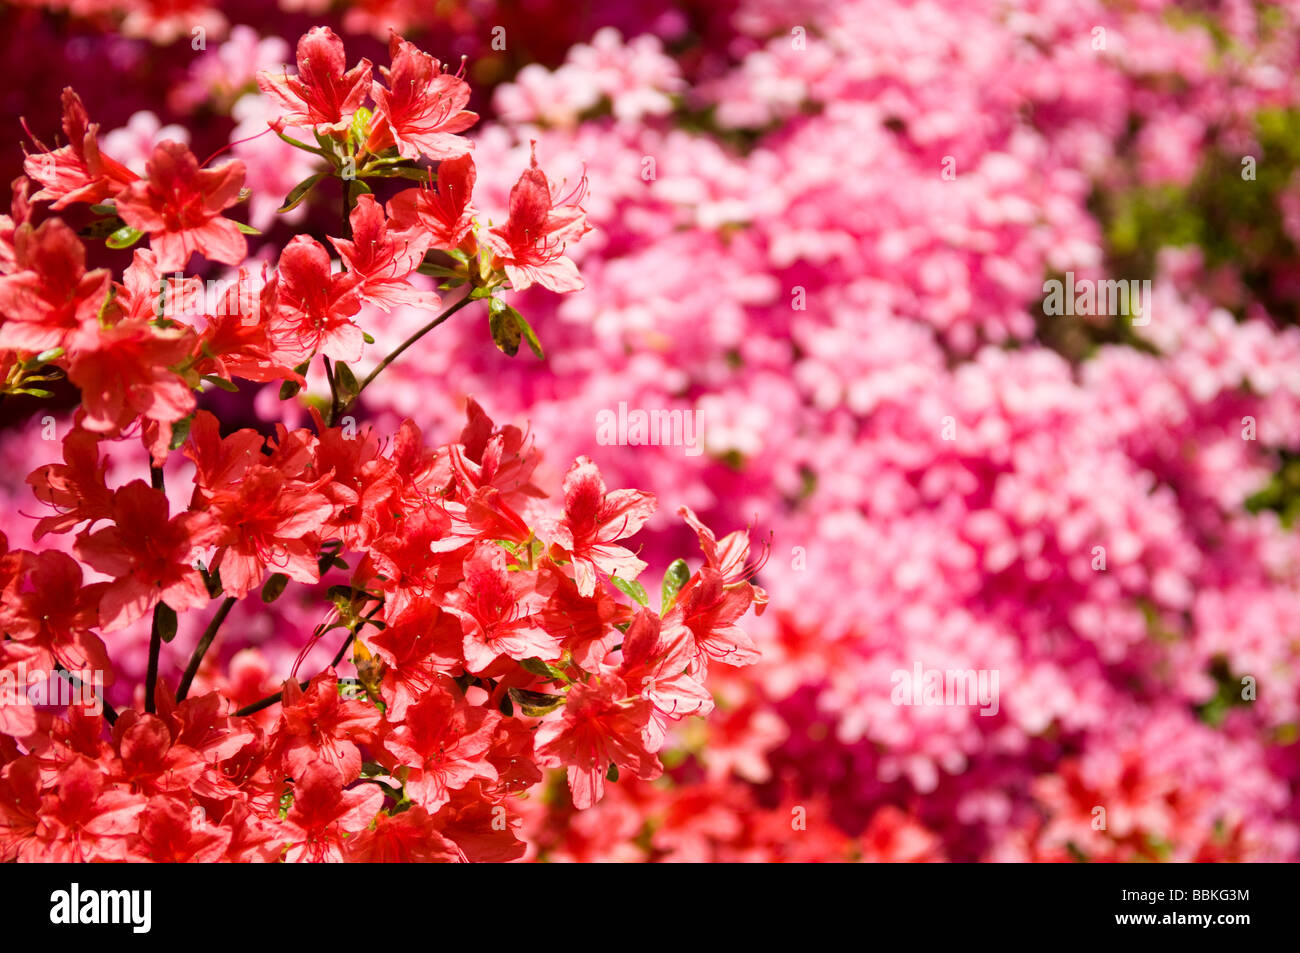 Red and pink azaleas in full bloom Stock Photo